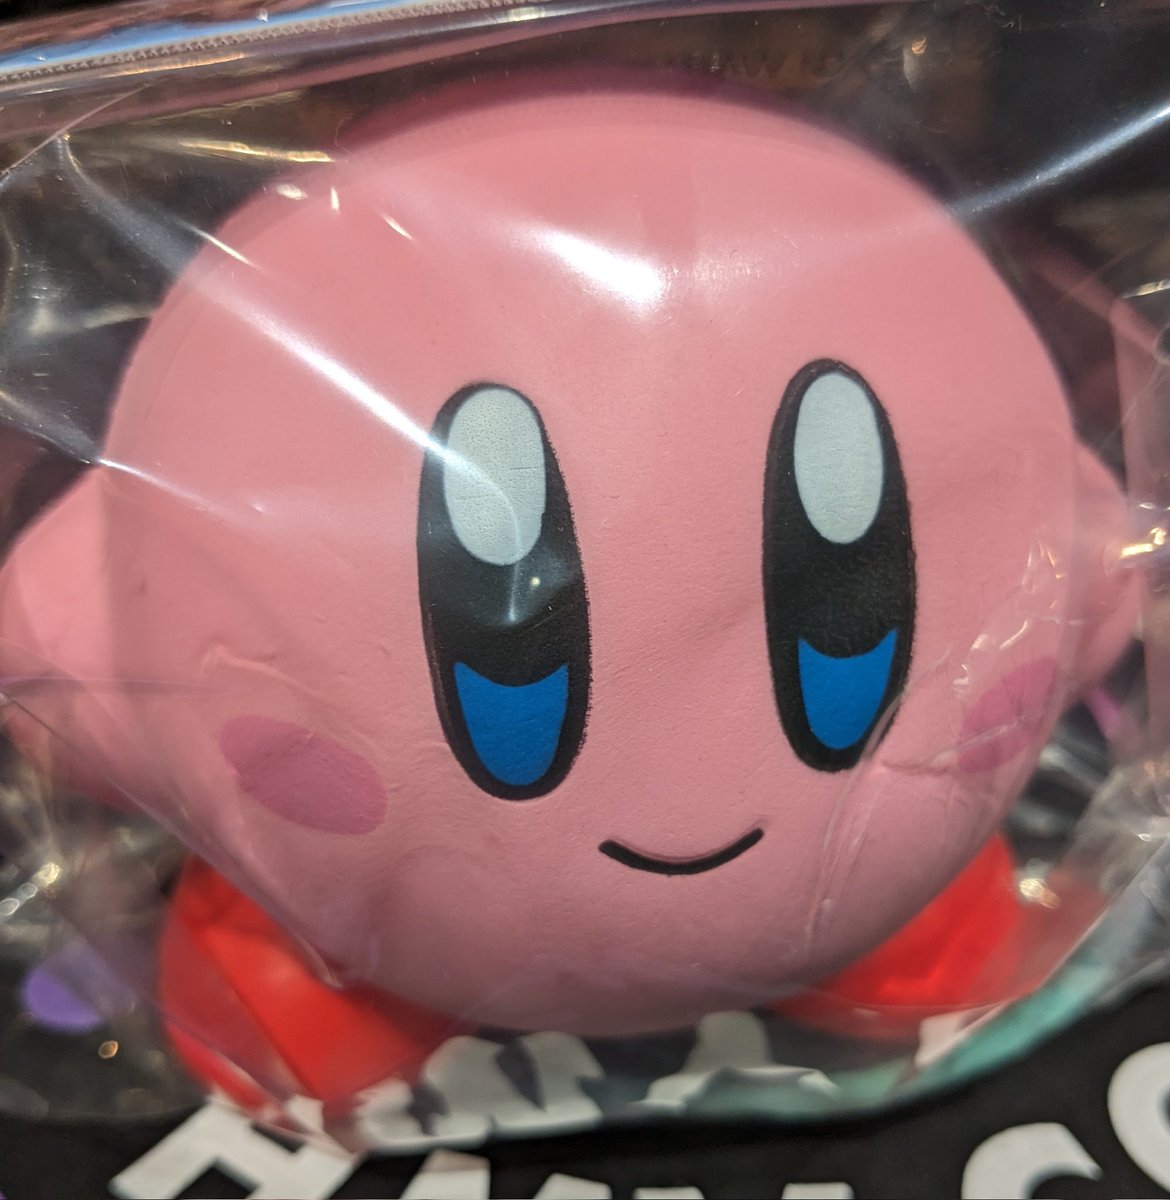 🚨New Stock Alert!!! Just in Kirby mega squishme!!!! #Squishme #PopCulture #kirby